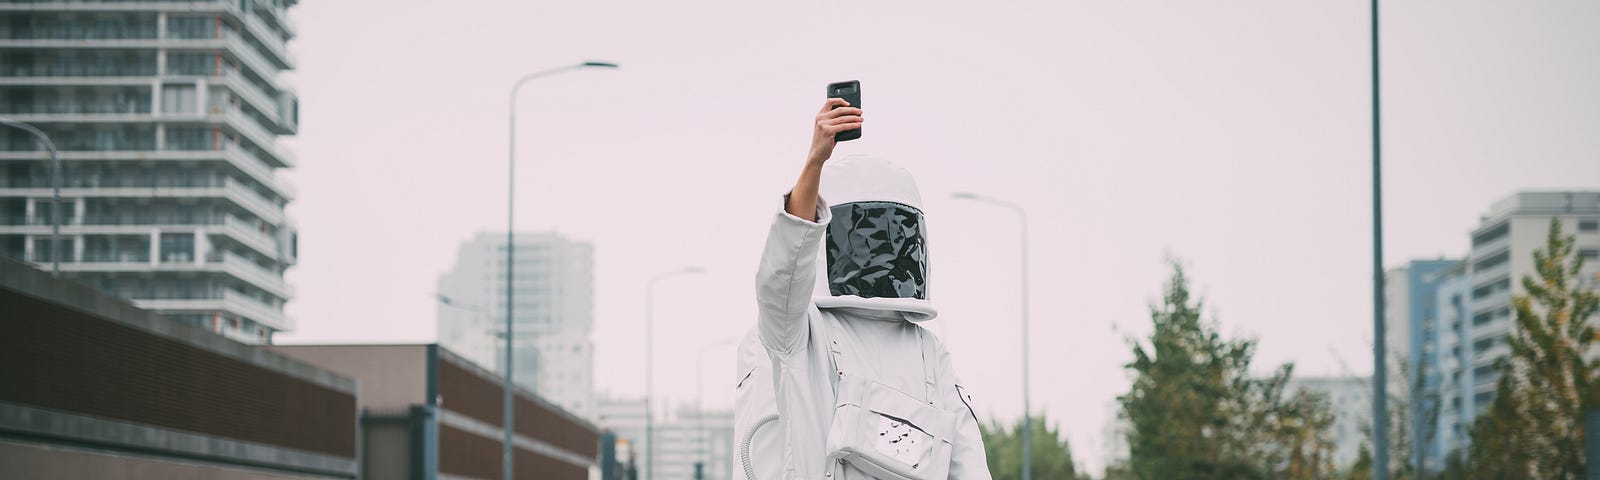 Person wearing astronaut standing in empty street with phone raised, taking a selfie.